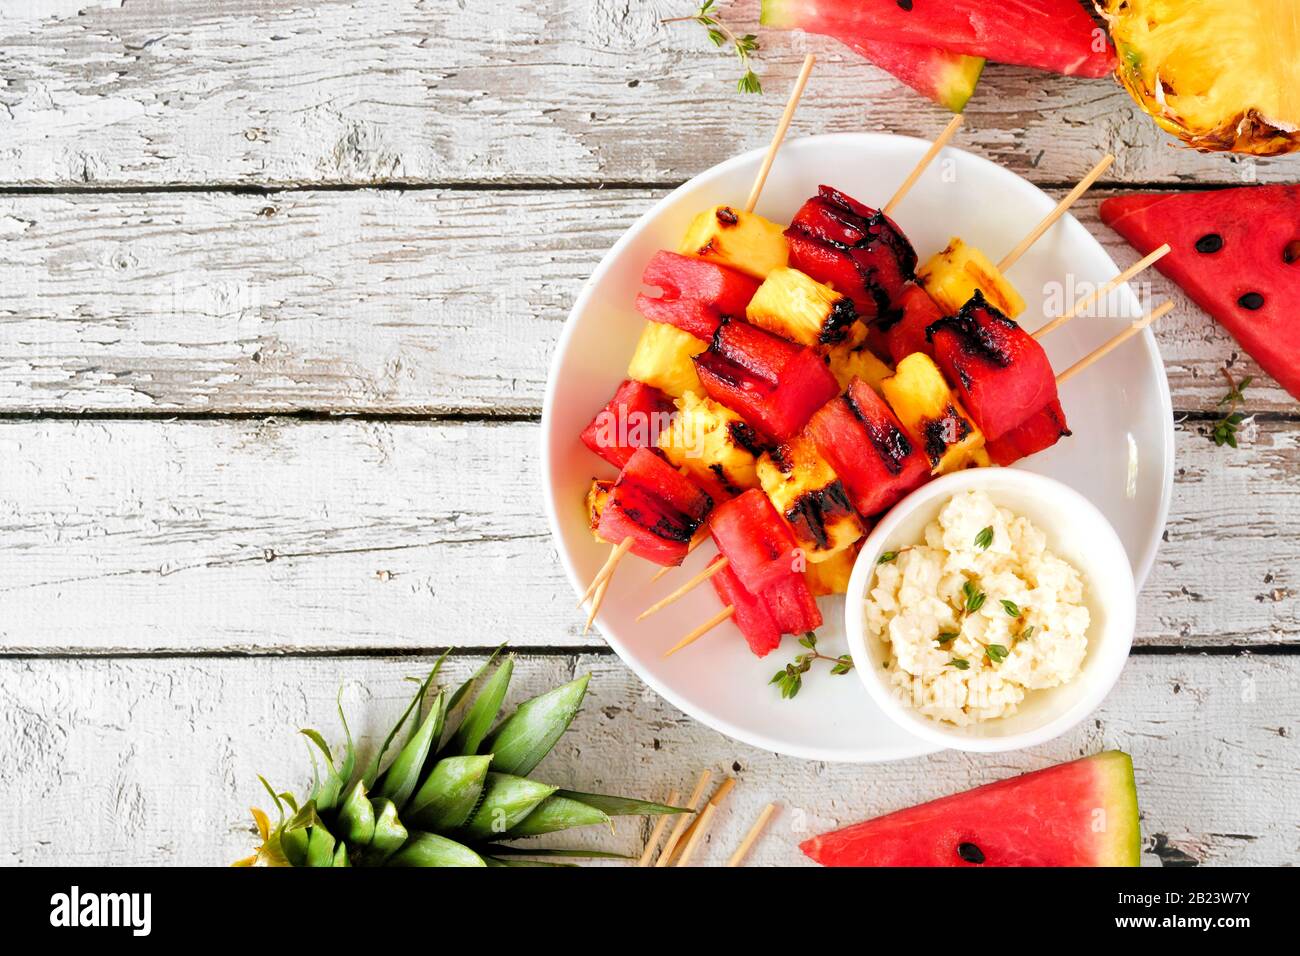 Grilled watermelon and pineapple fruit skewers with feta. Above view on a white wood table. Summer food concept. Stock Photo